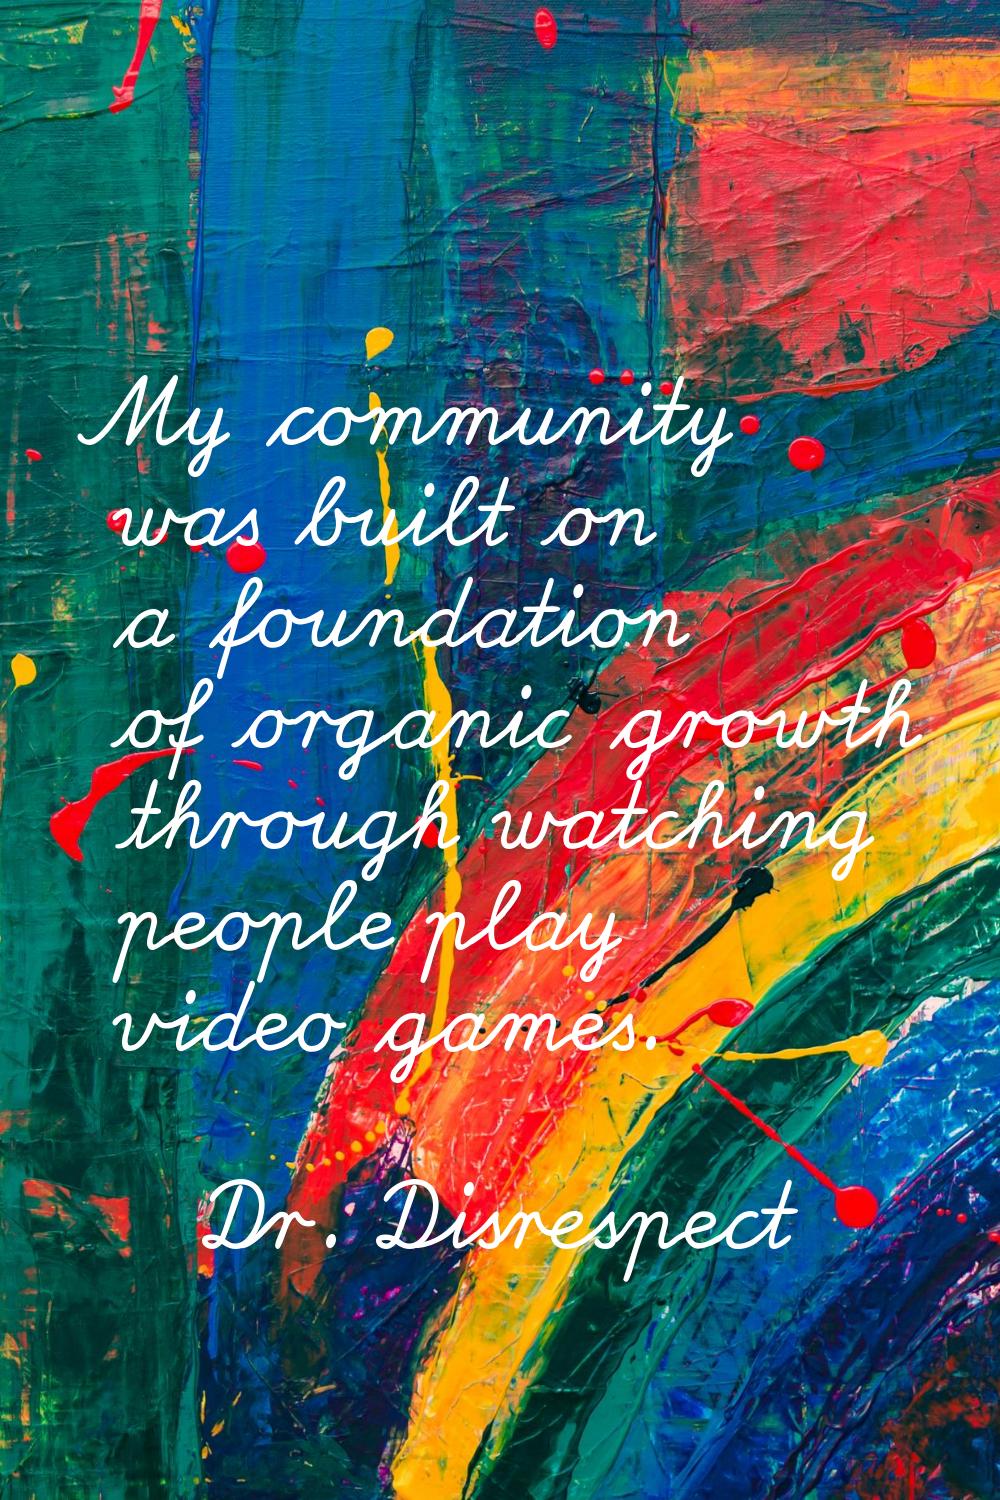 My community was built on a foundation of organic growth through watching people play video games.